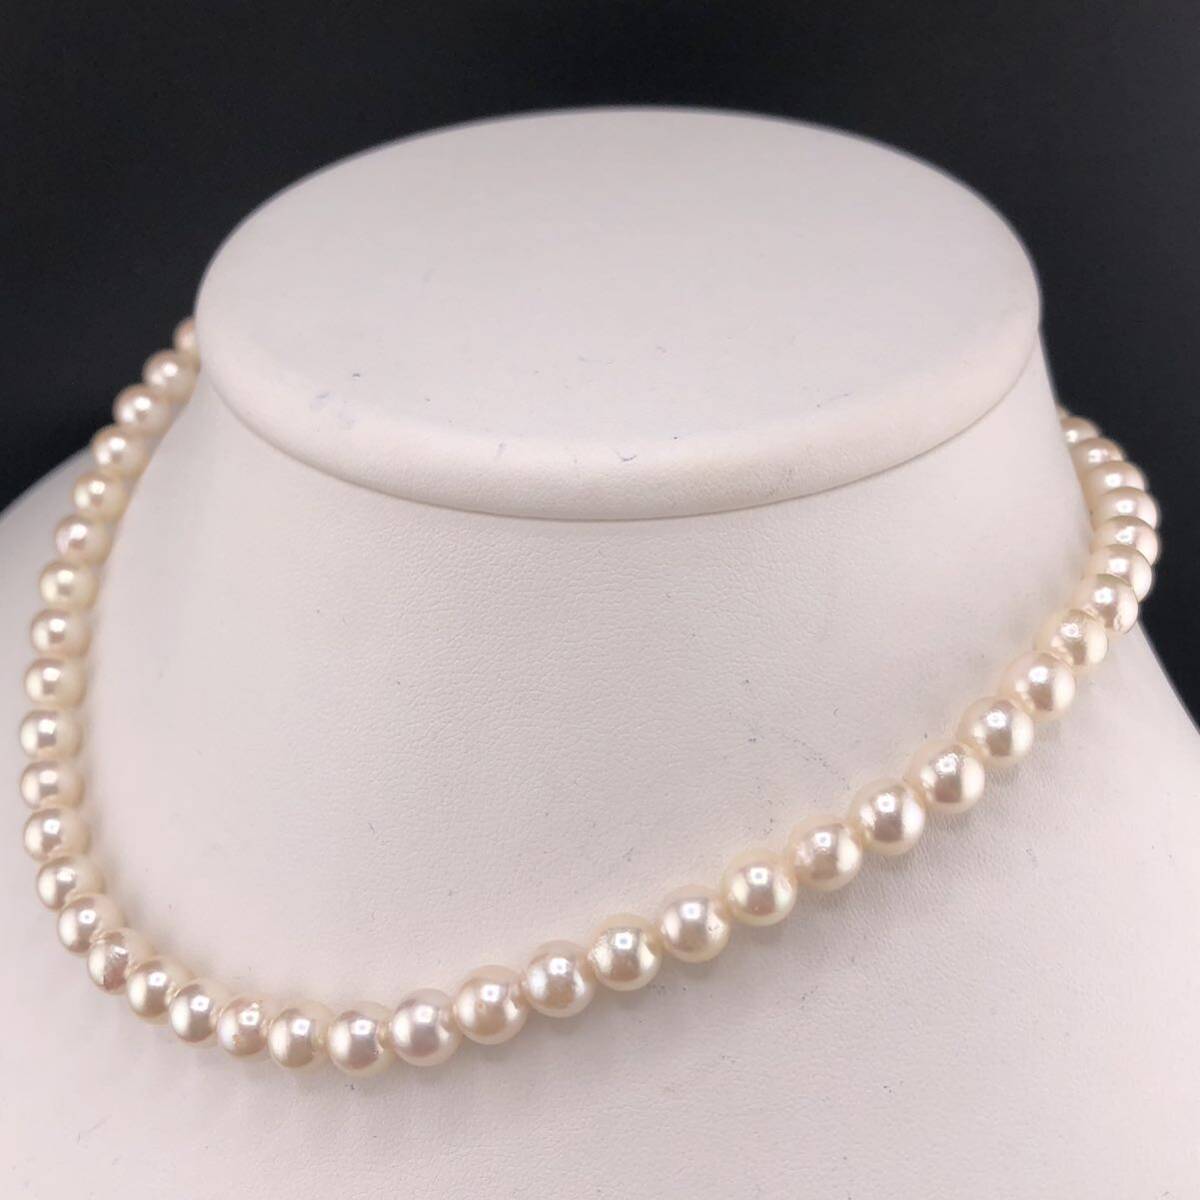 E04-5519 アコヤパールネックレス 6.5mm~7.0mm 38cm 26.5g ( アコヤ真珠 Pearl necklace SILVER )の画像2